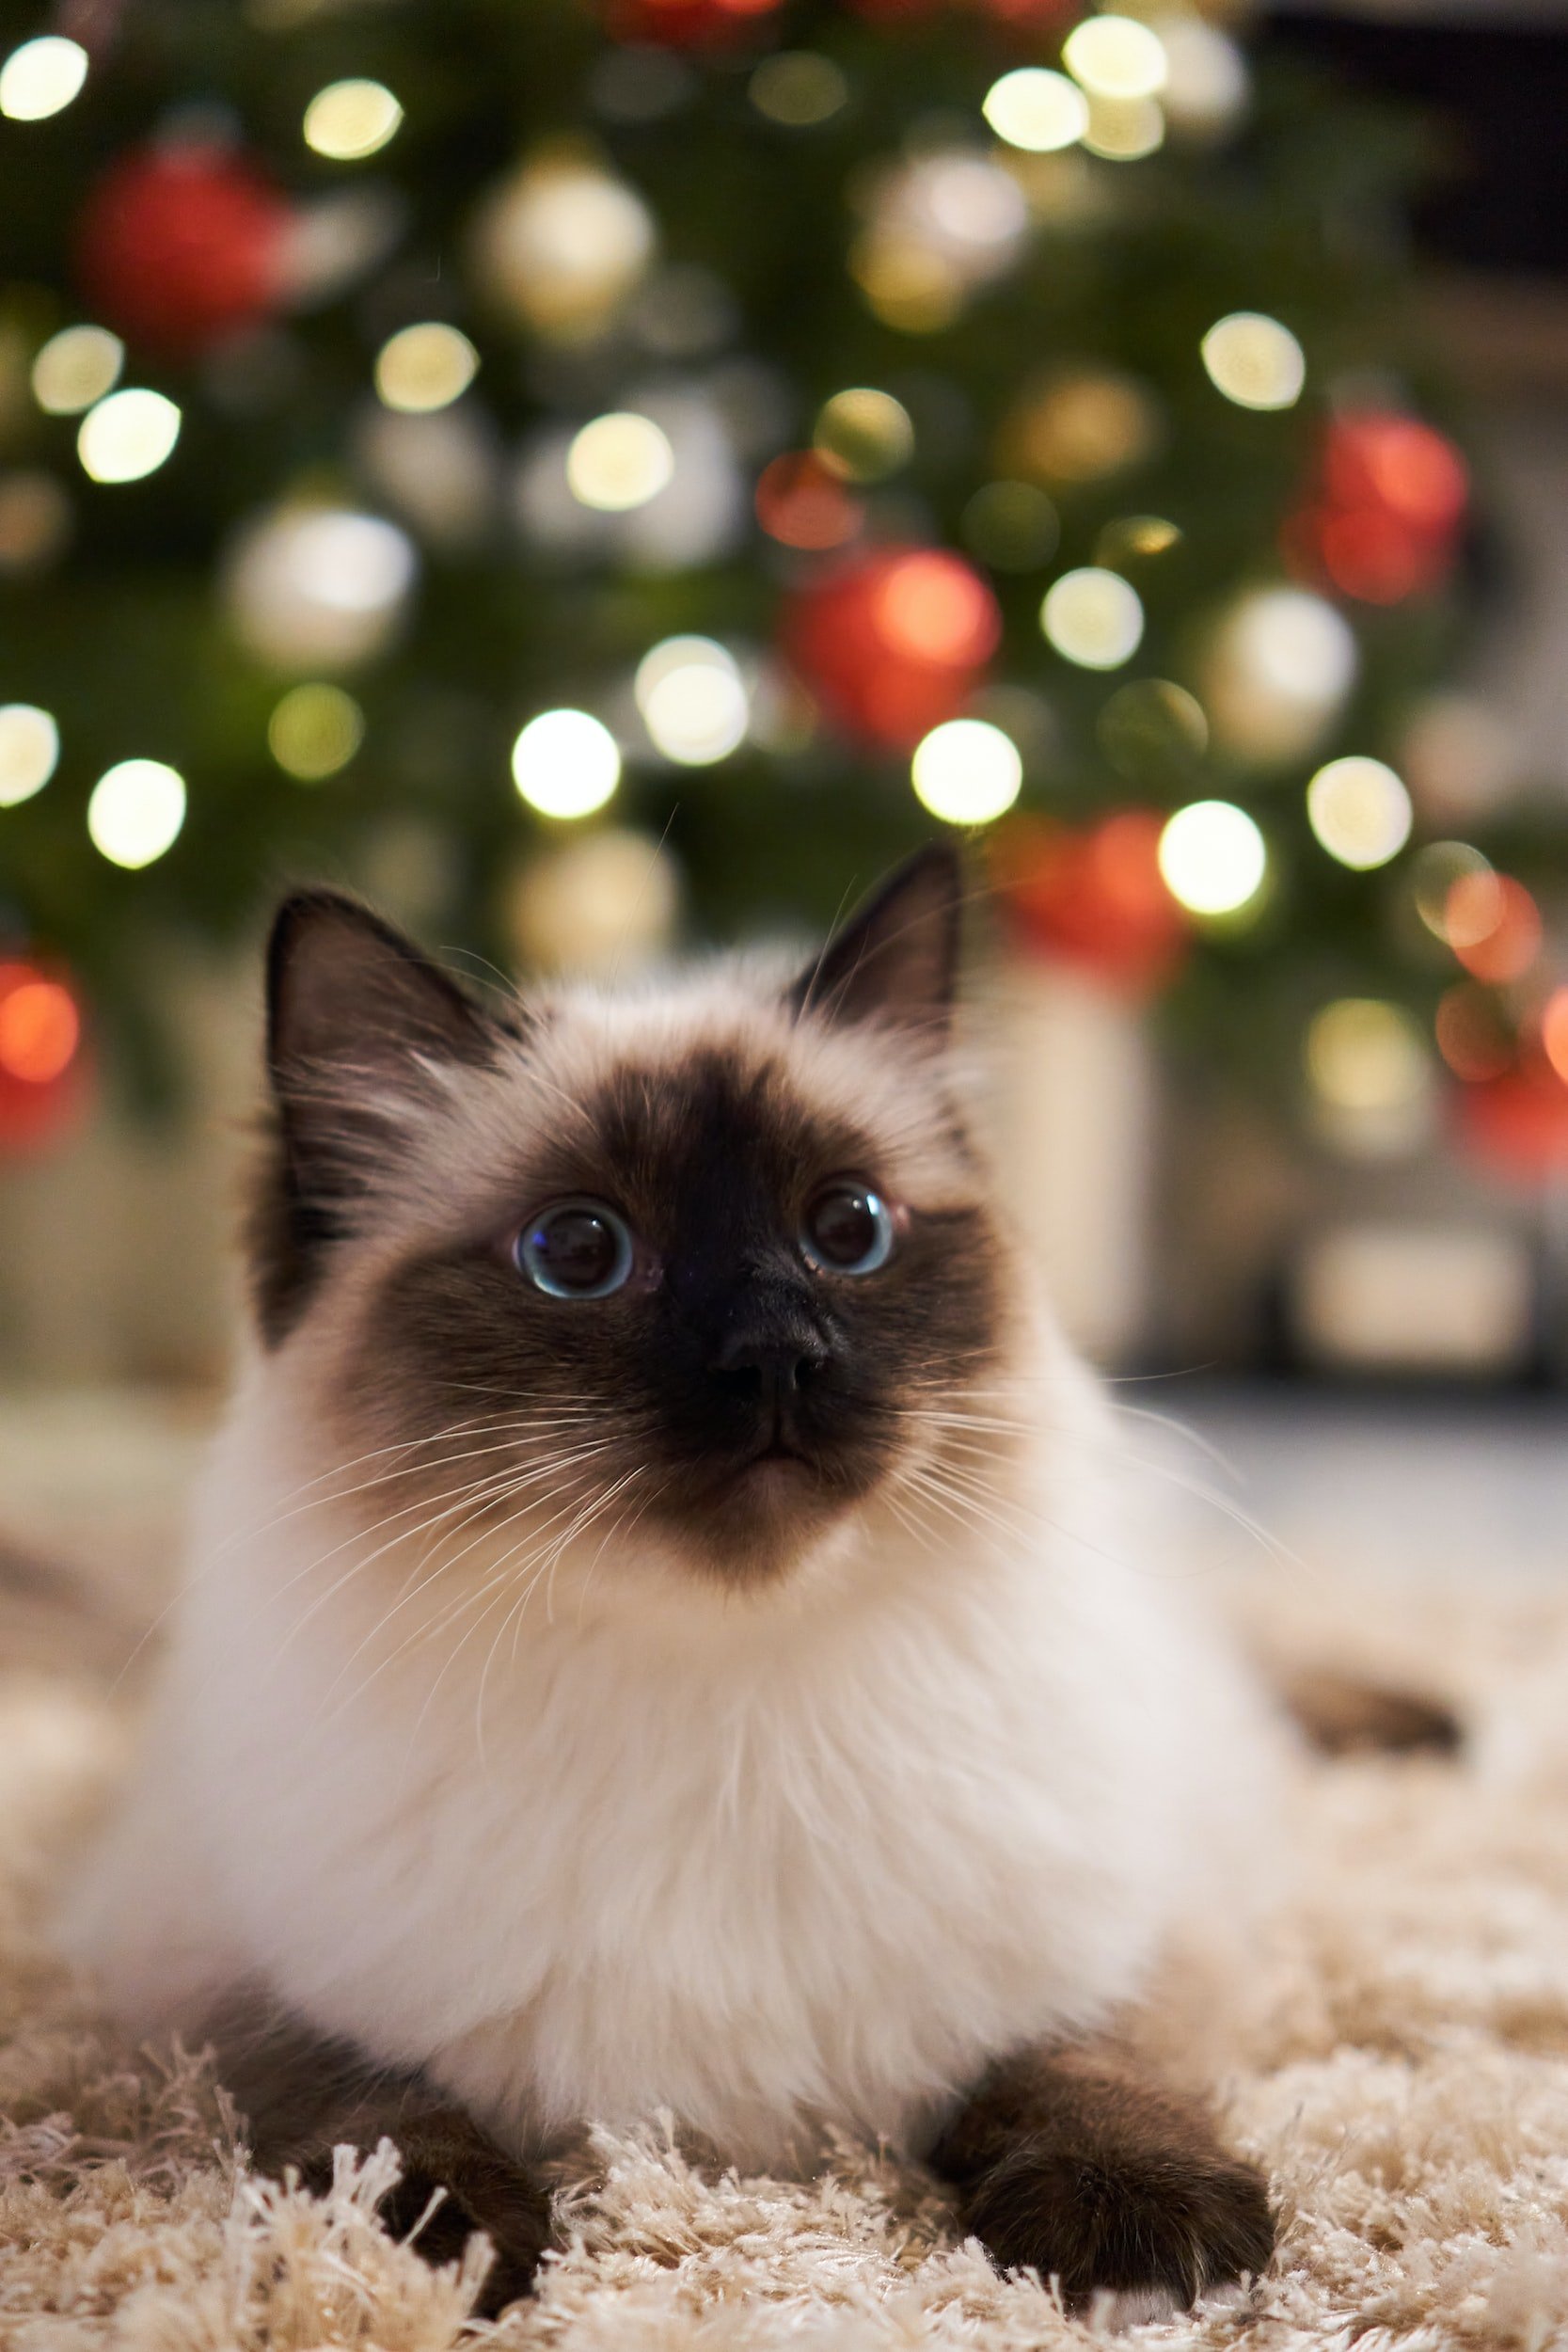 Can You Have a Real Christmas Tree If You’ve Got Cats?